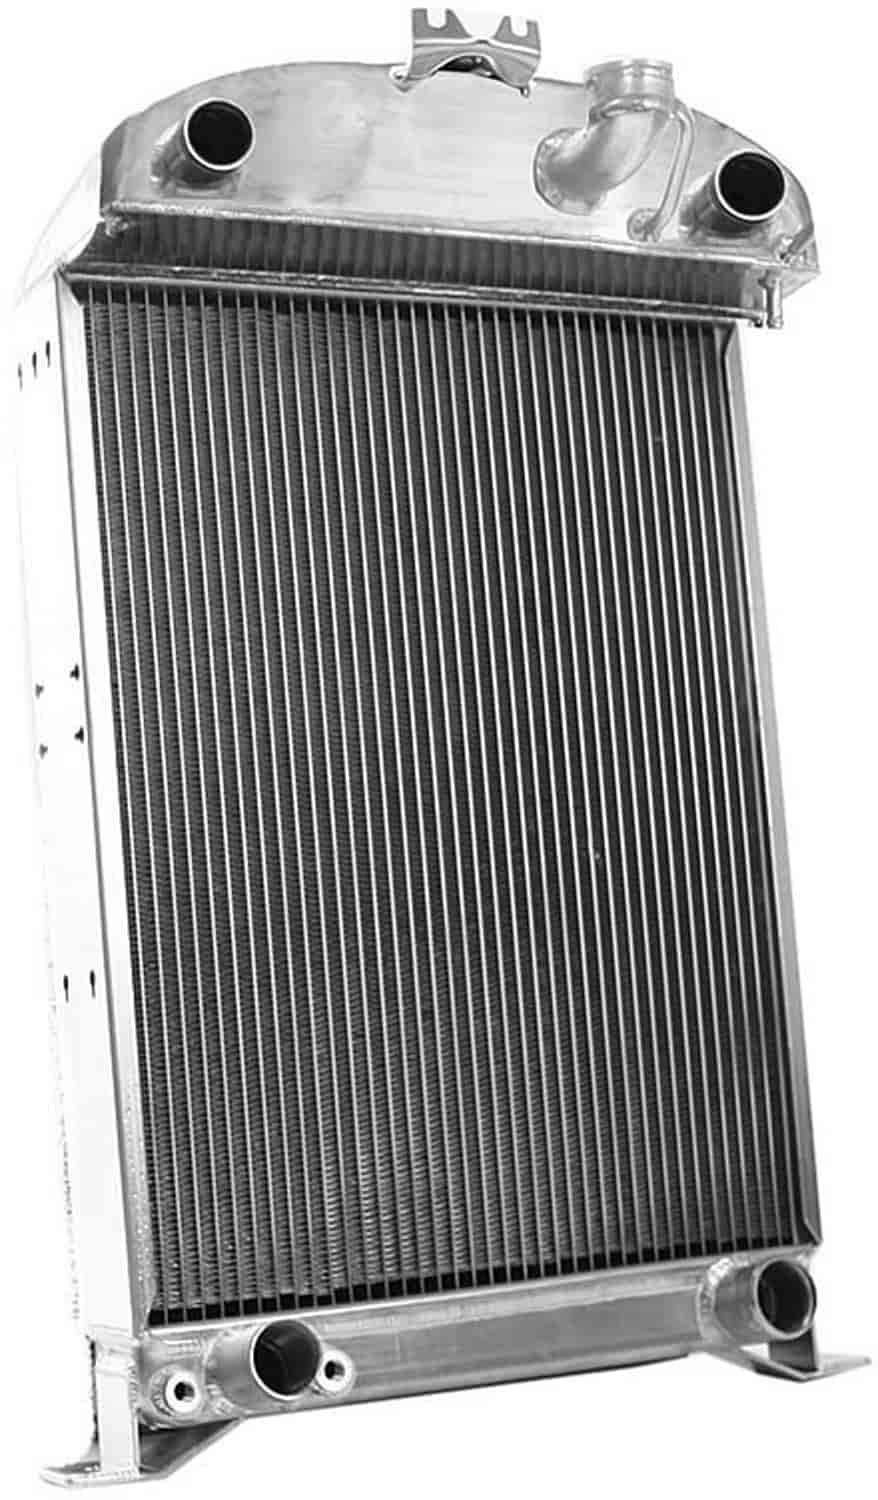 ExactFit Radiator for 1933-1934 Ford with Early Ford